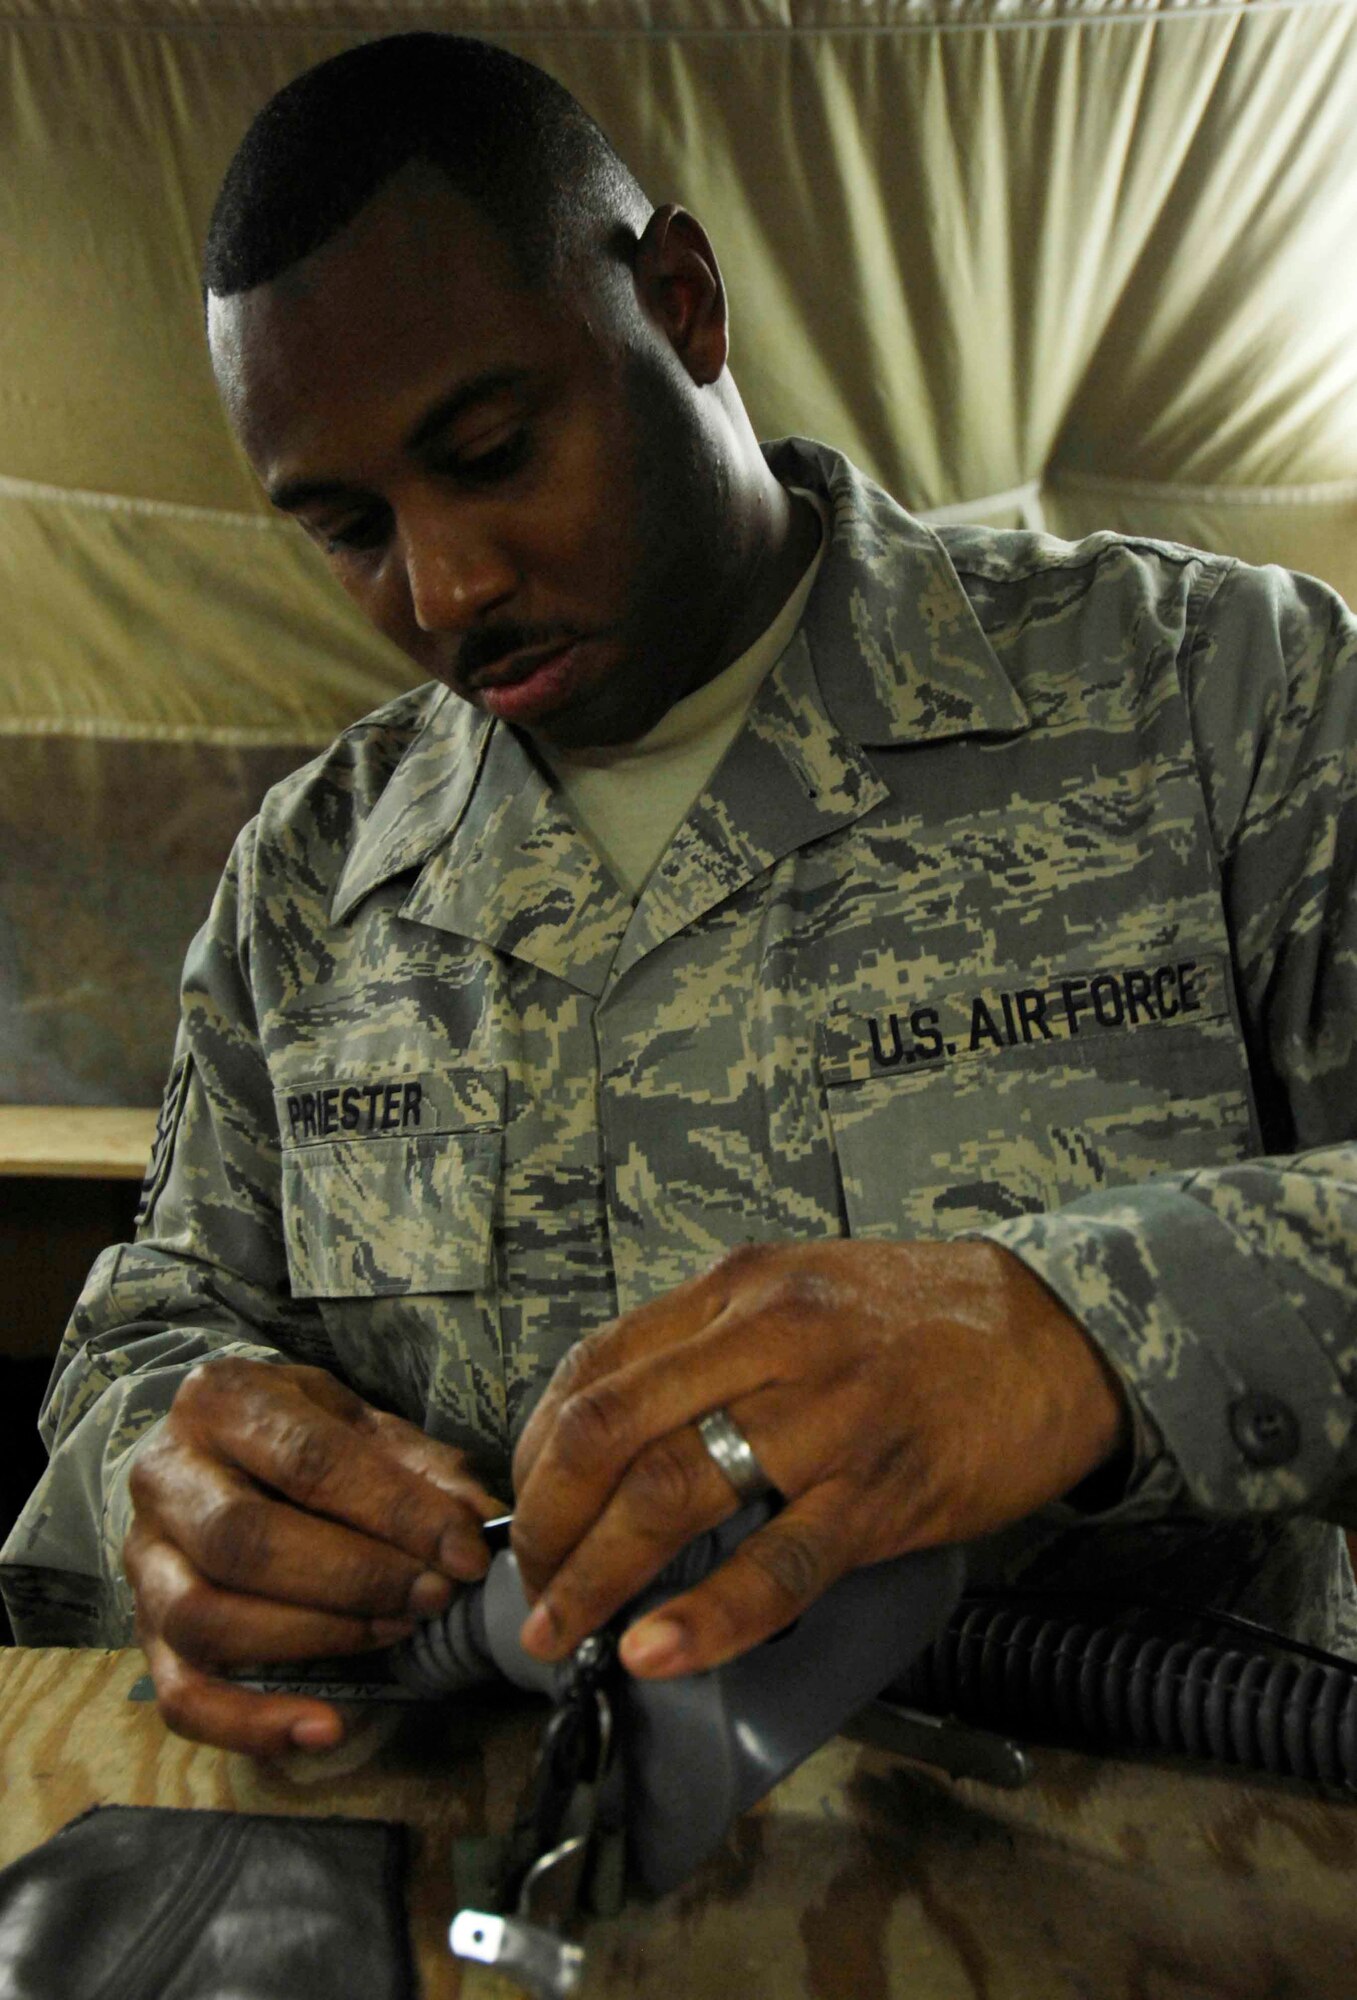 BAGRAM AIR BASE, Afghanistan - Aircrew life support technician Technical Sgt. Will Priester, 774th Expeditionary Airlift Squadron, performs a routine check on the equipment used by aircrew members here, Dec. 12, 2007.  (U.S. Air Force photo/Staff Sgt. Joshua T Jasper)  (Released)
